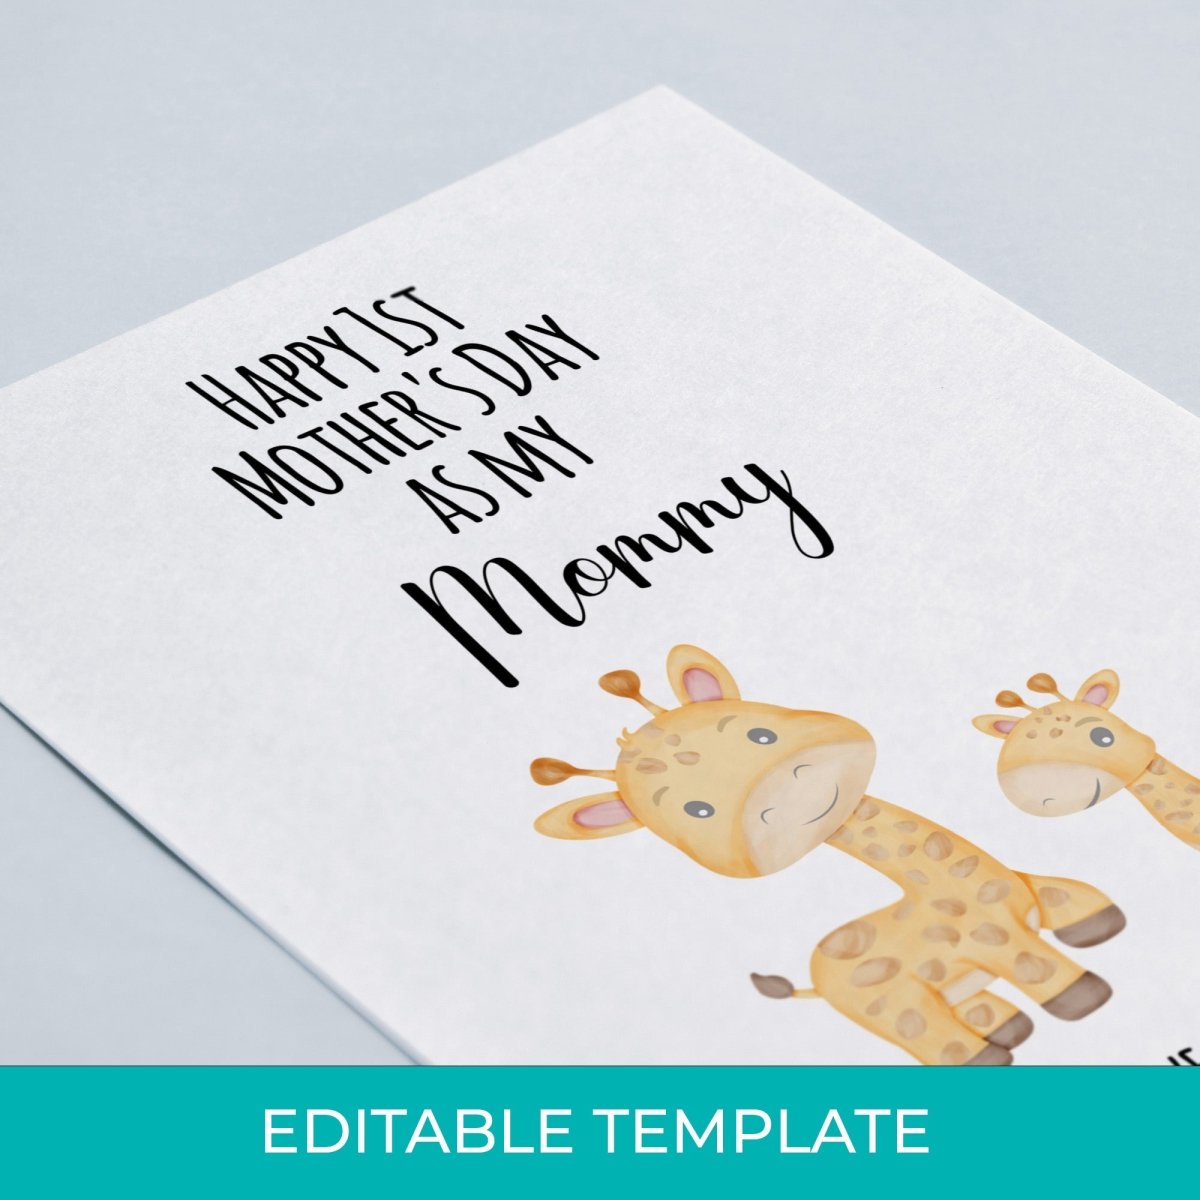 EDITABLE Mother's Day printable download template - Meaningful Cards